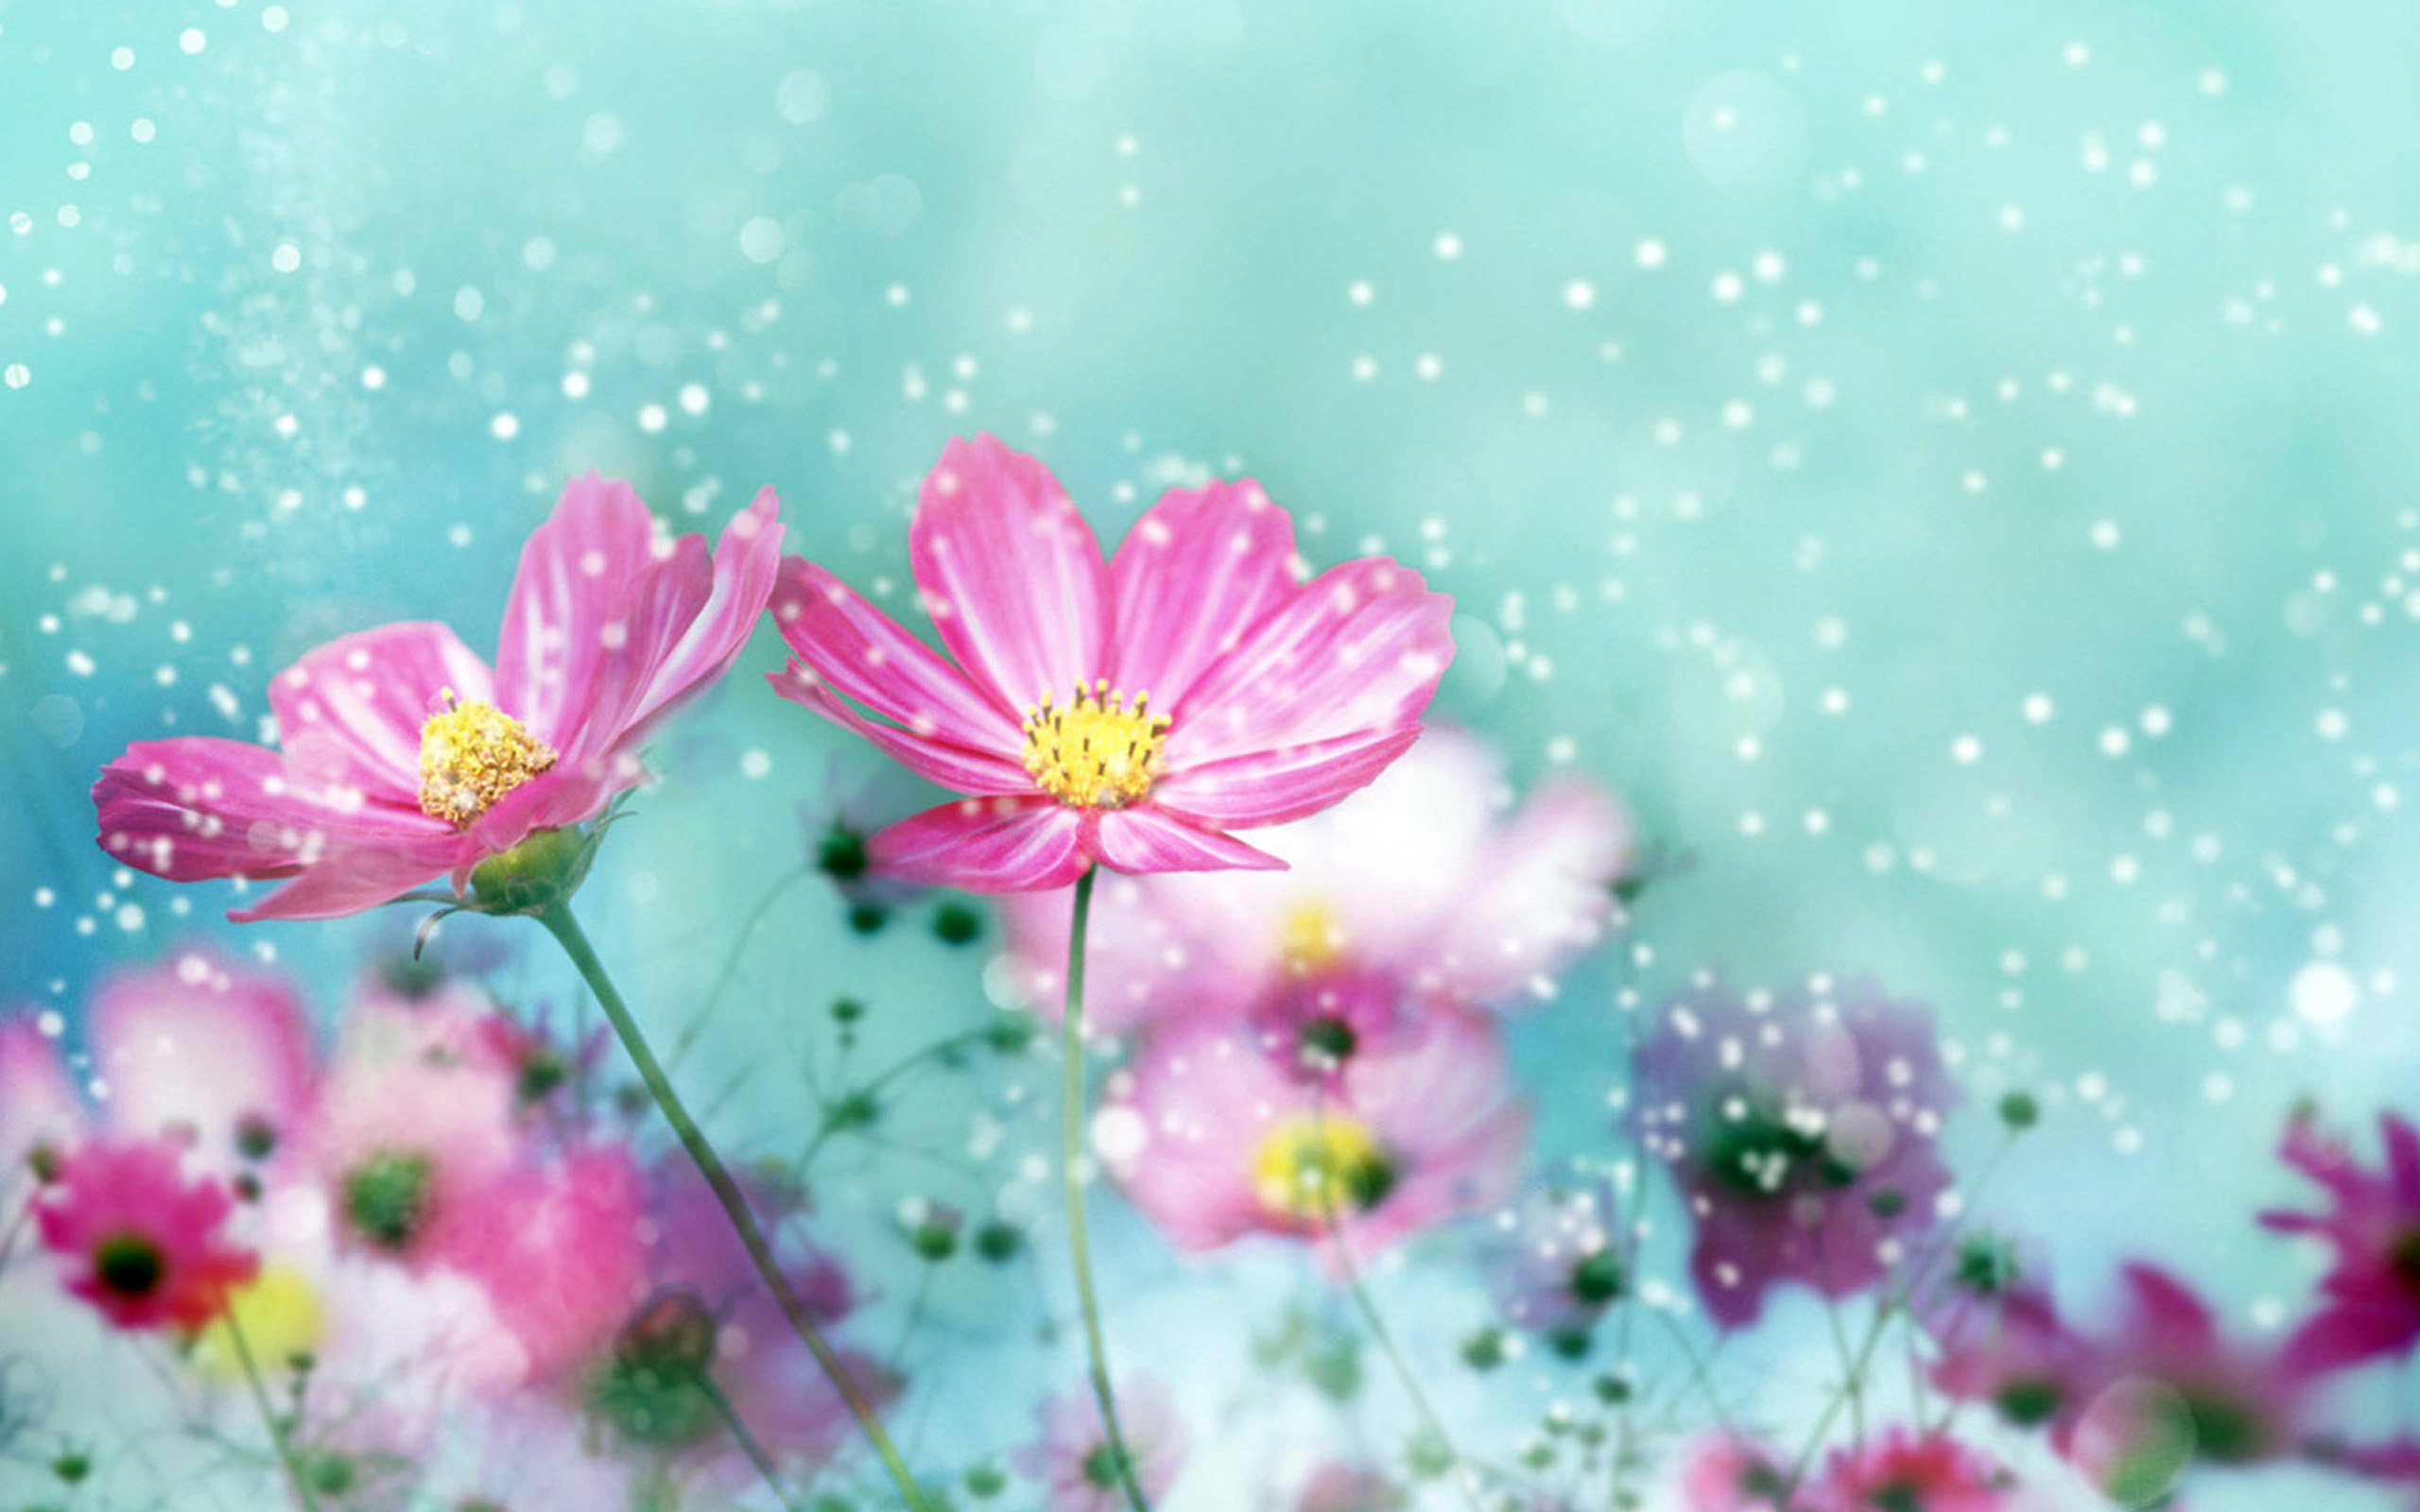 Beautiful Flower Wallpaper For Desktop Free Download To Make Your